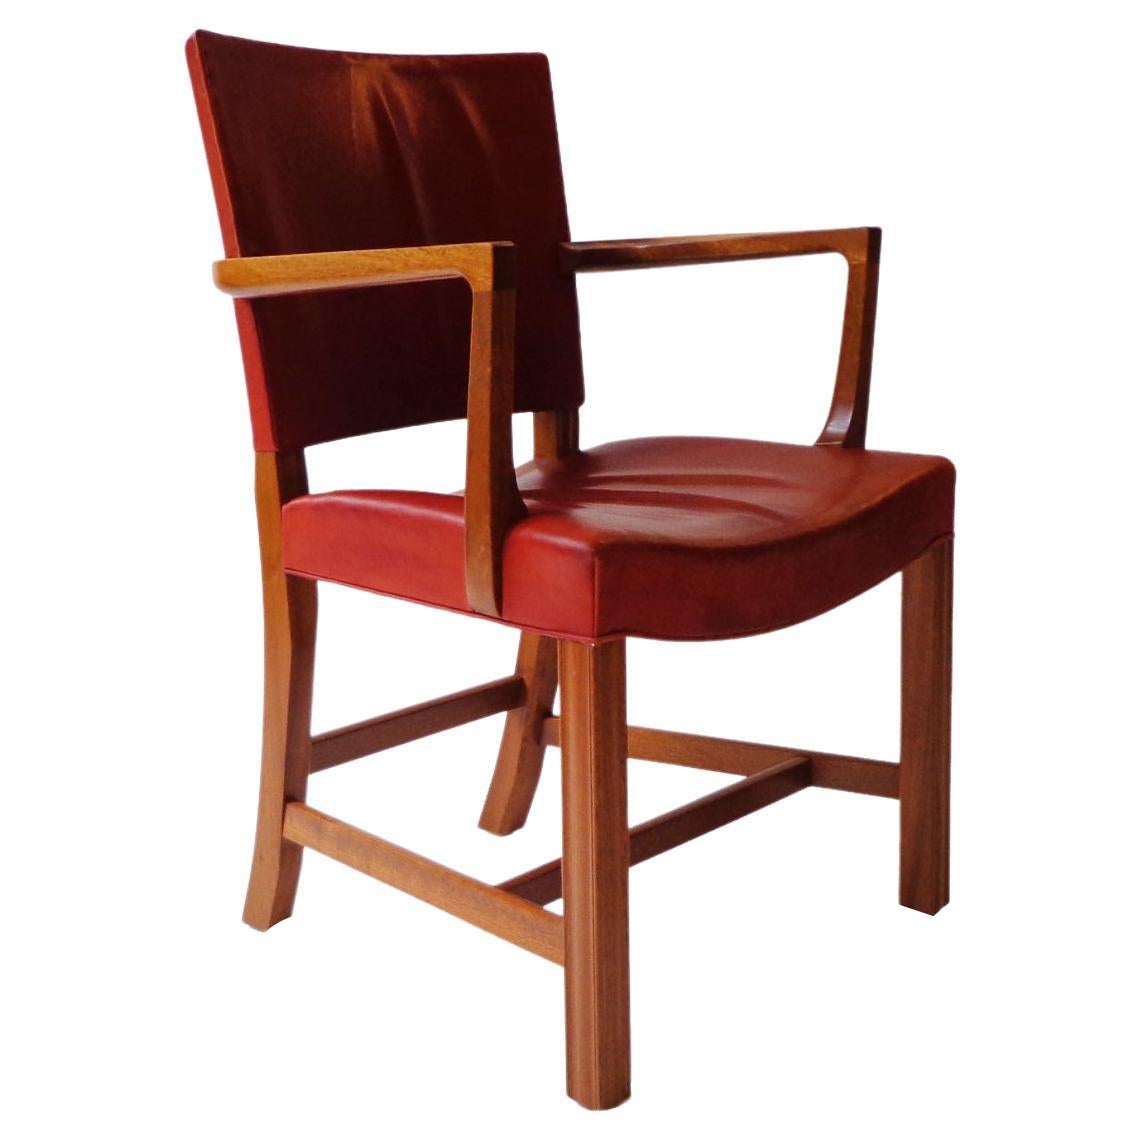 Kaare Klint Armchair Model 3758a in Leather and Mahogany Rud Rasmussen Denmark For Sale